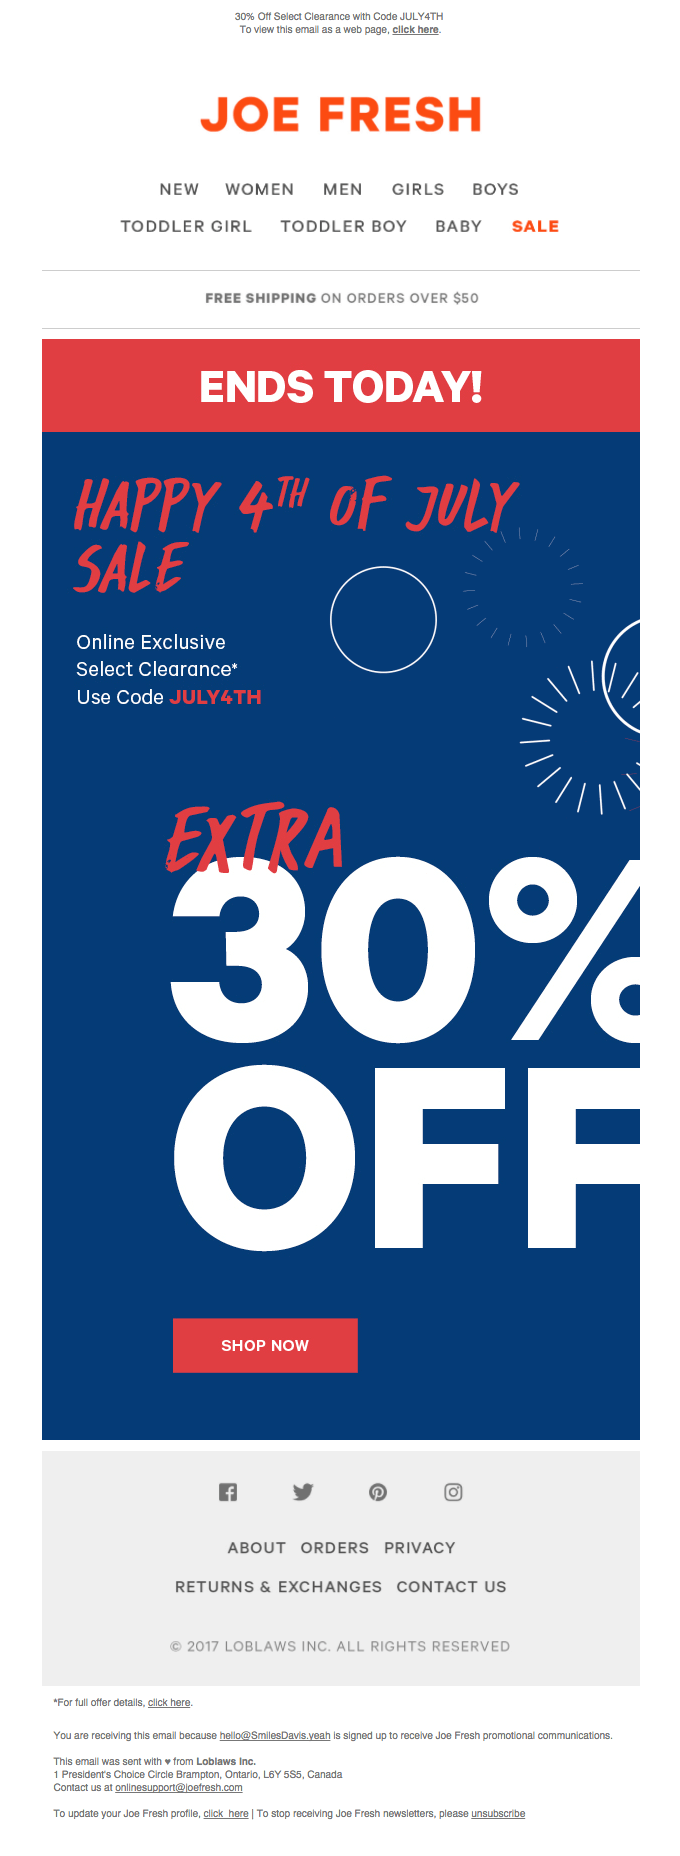 Independence Day sales email from Joe Fresh